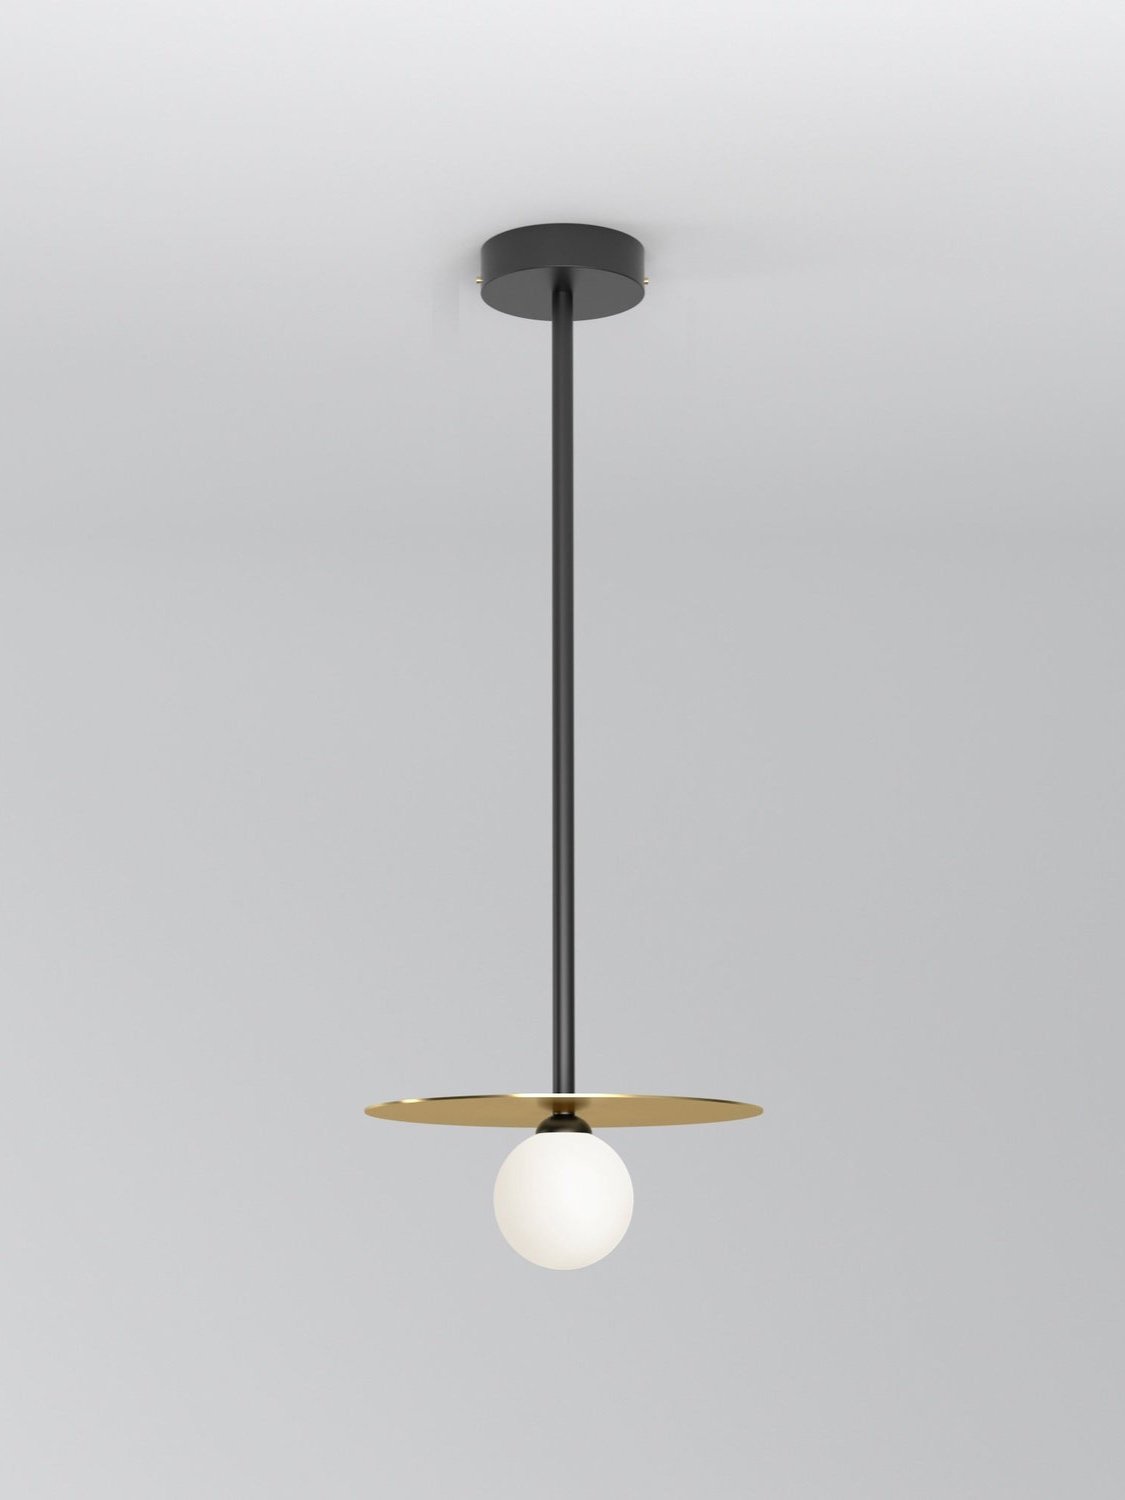 DISC AND SPHERE PENDANT LIGHT / HORIZONTAL /  FABRIC CABLE / PILL BOX 38mm ATTACHMENT 